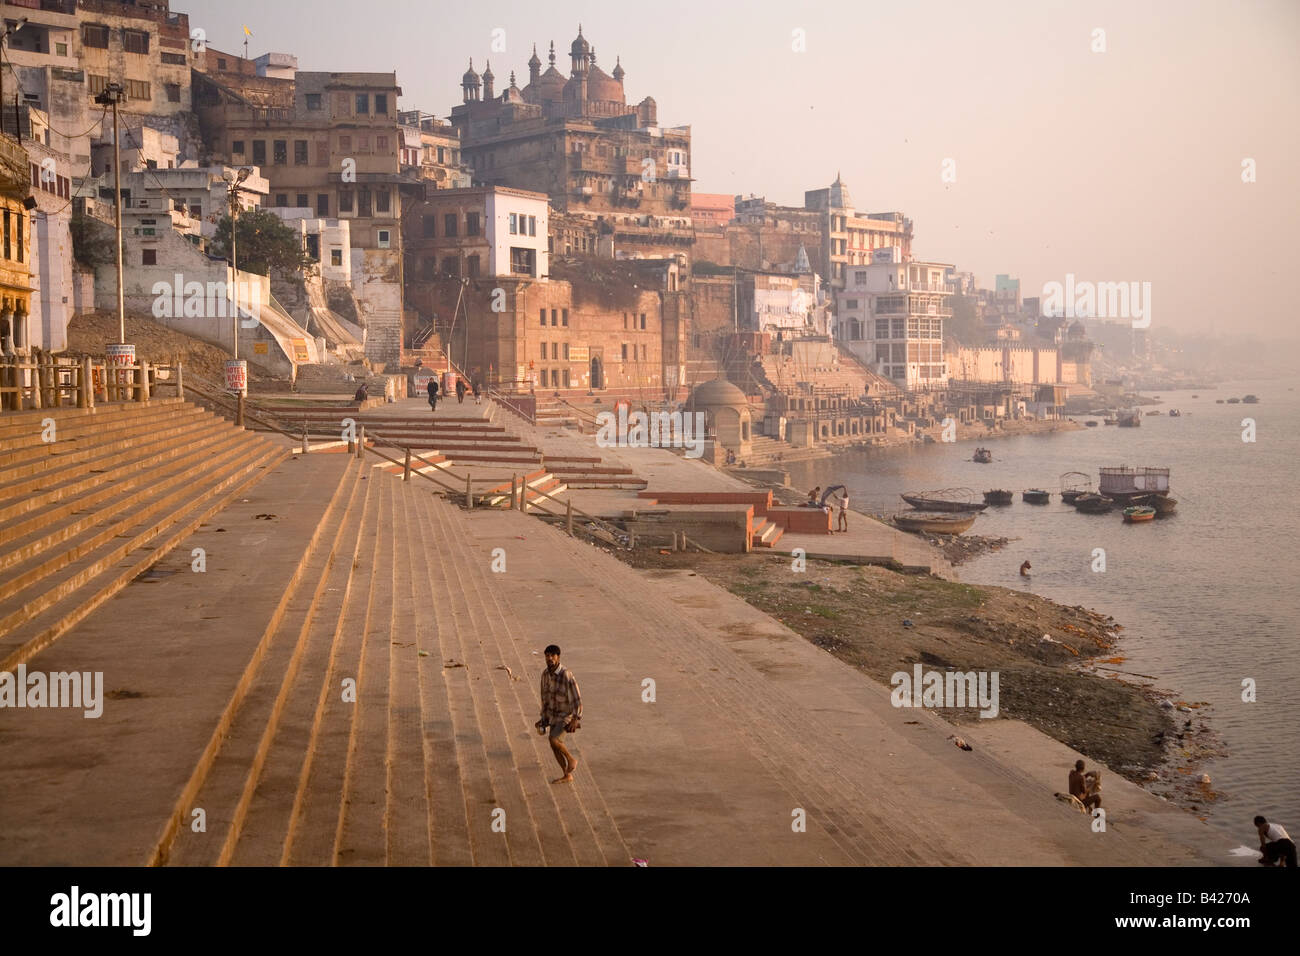 Morning on the ghats in the city of Varanasi, India. Stock Photo